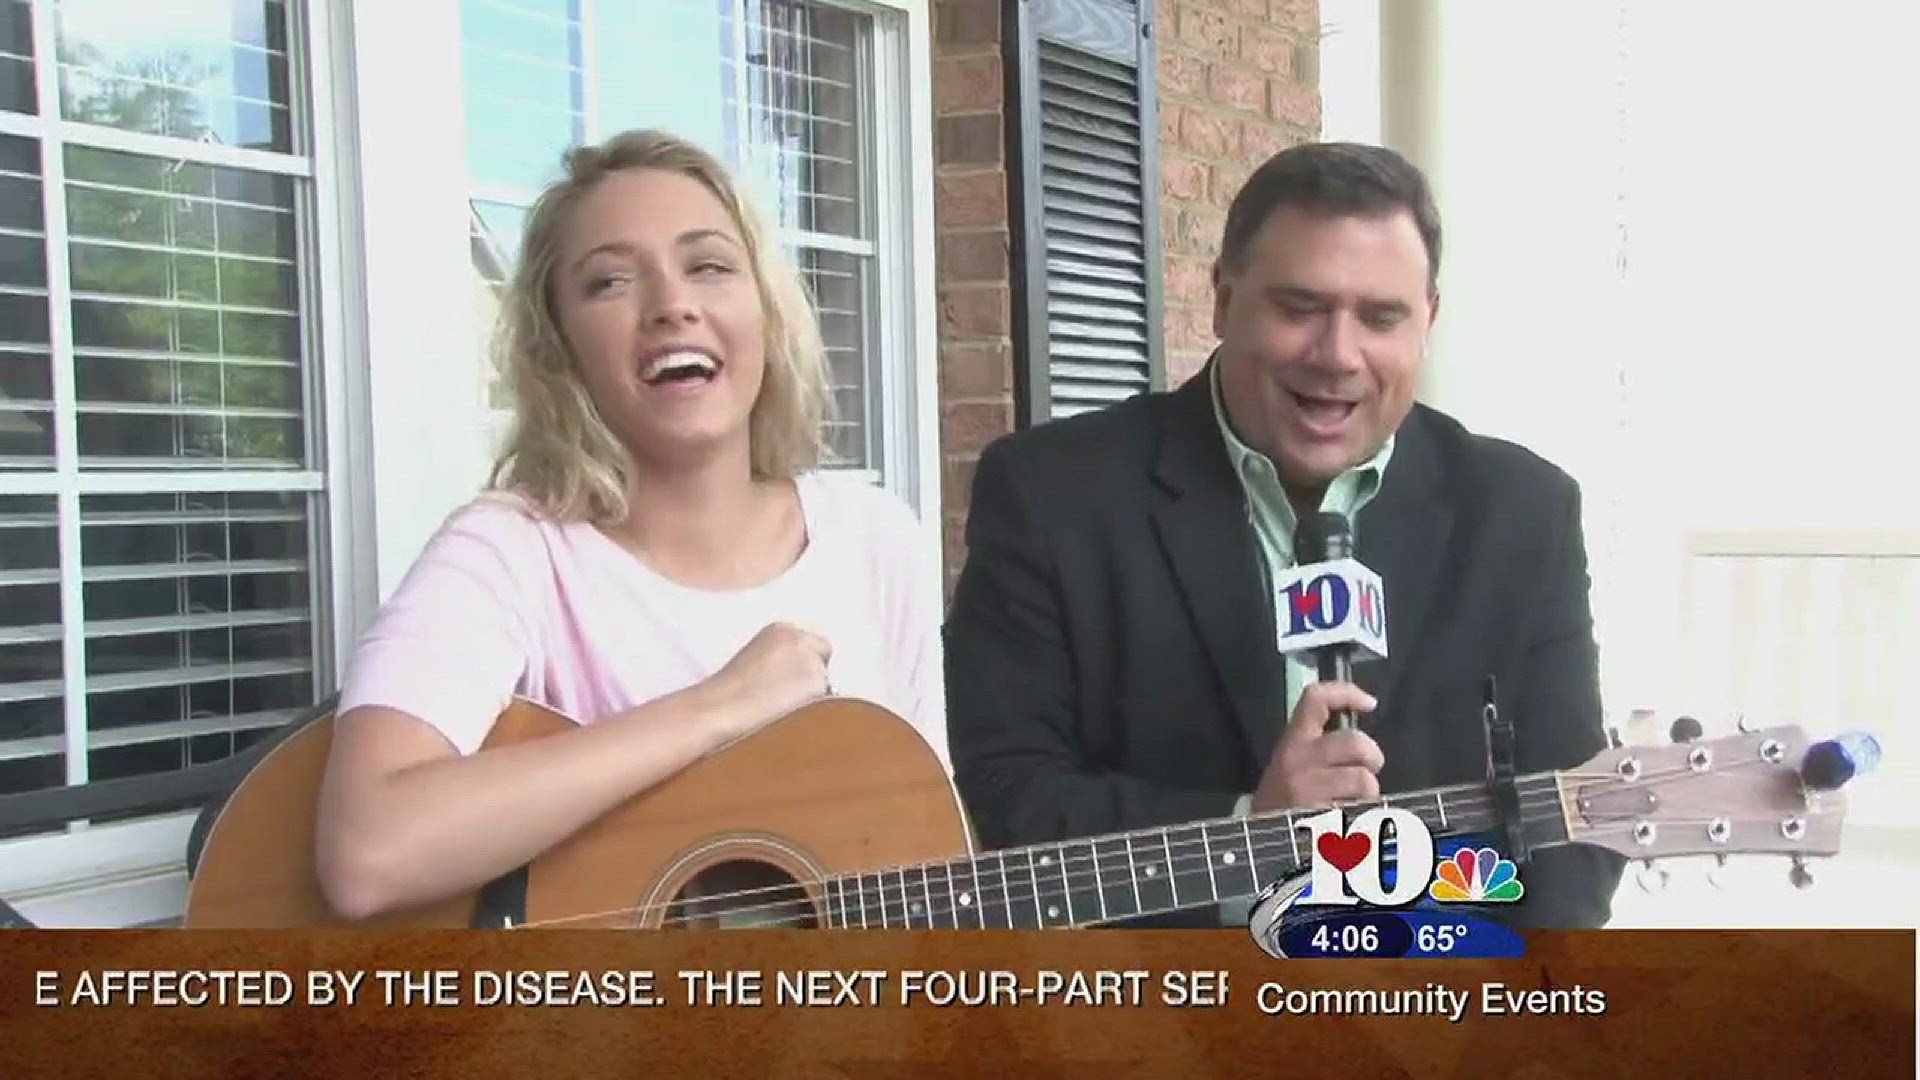 Live at Five at 4May 6, 2016Russell catches up with Emily Ann Roberts (Runner up during Season 9 of NBC's The Voice) who is performing as part of CTE Live at 6:30pm on May 6 at Market Square stage.